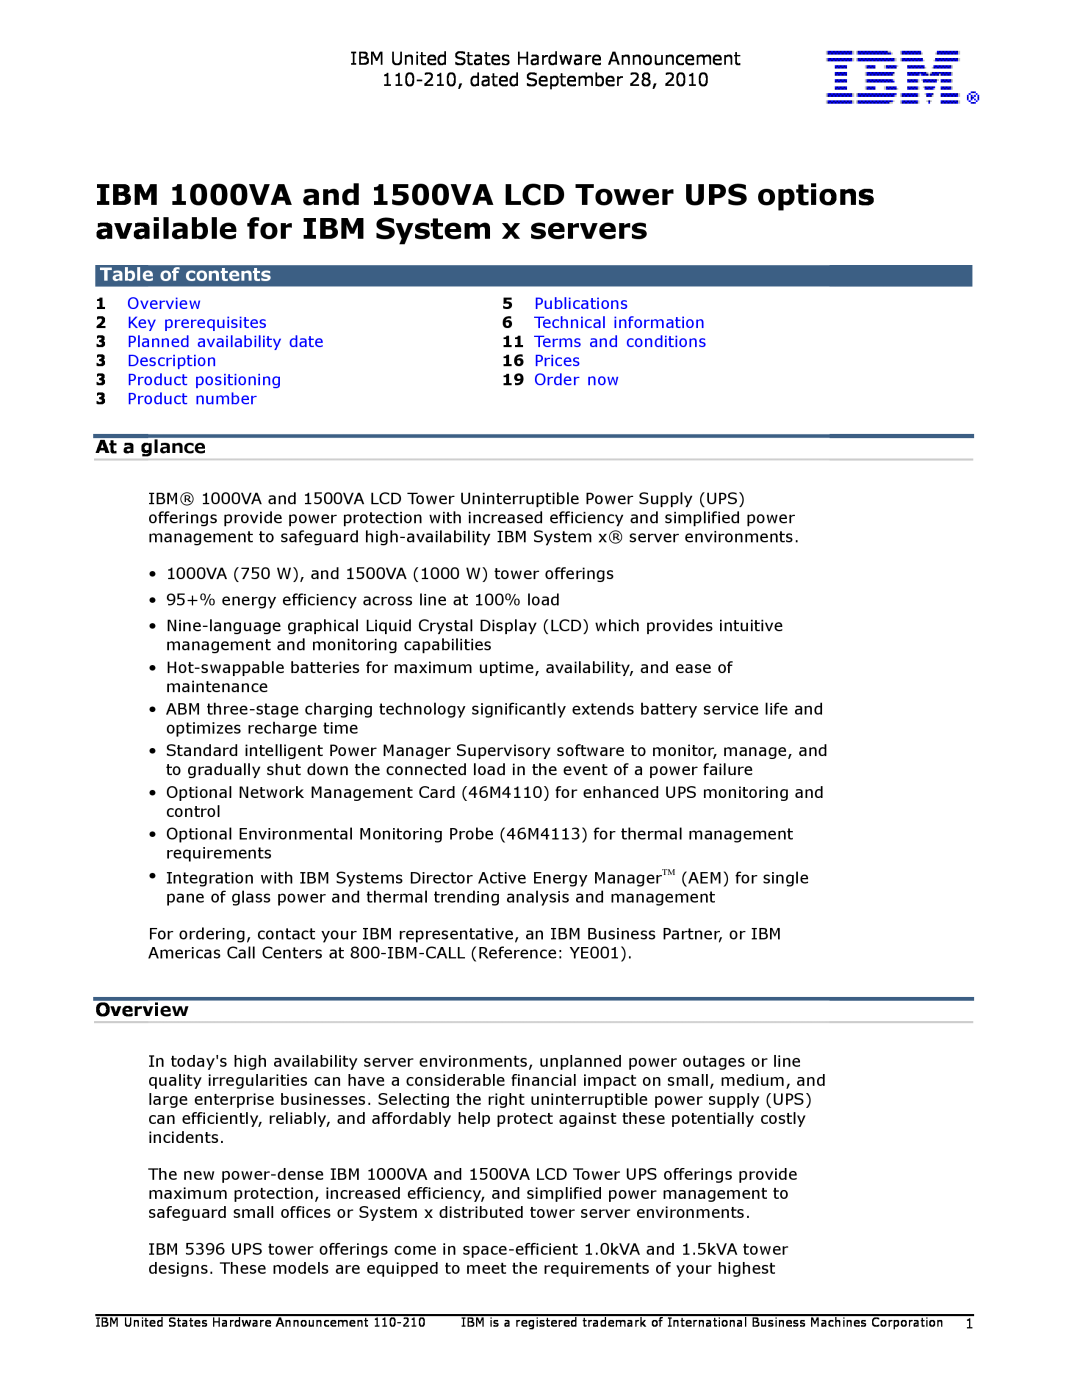 IBM 1500VA manual IBM United States Hardware Announcement 110-210, dated September, At a glance, Overview, Publications 